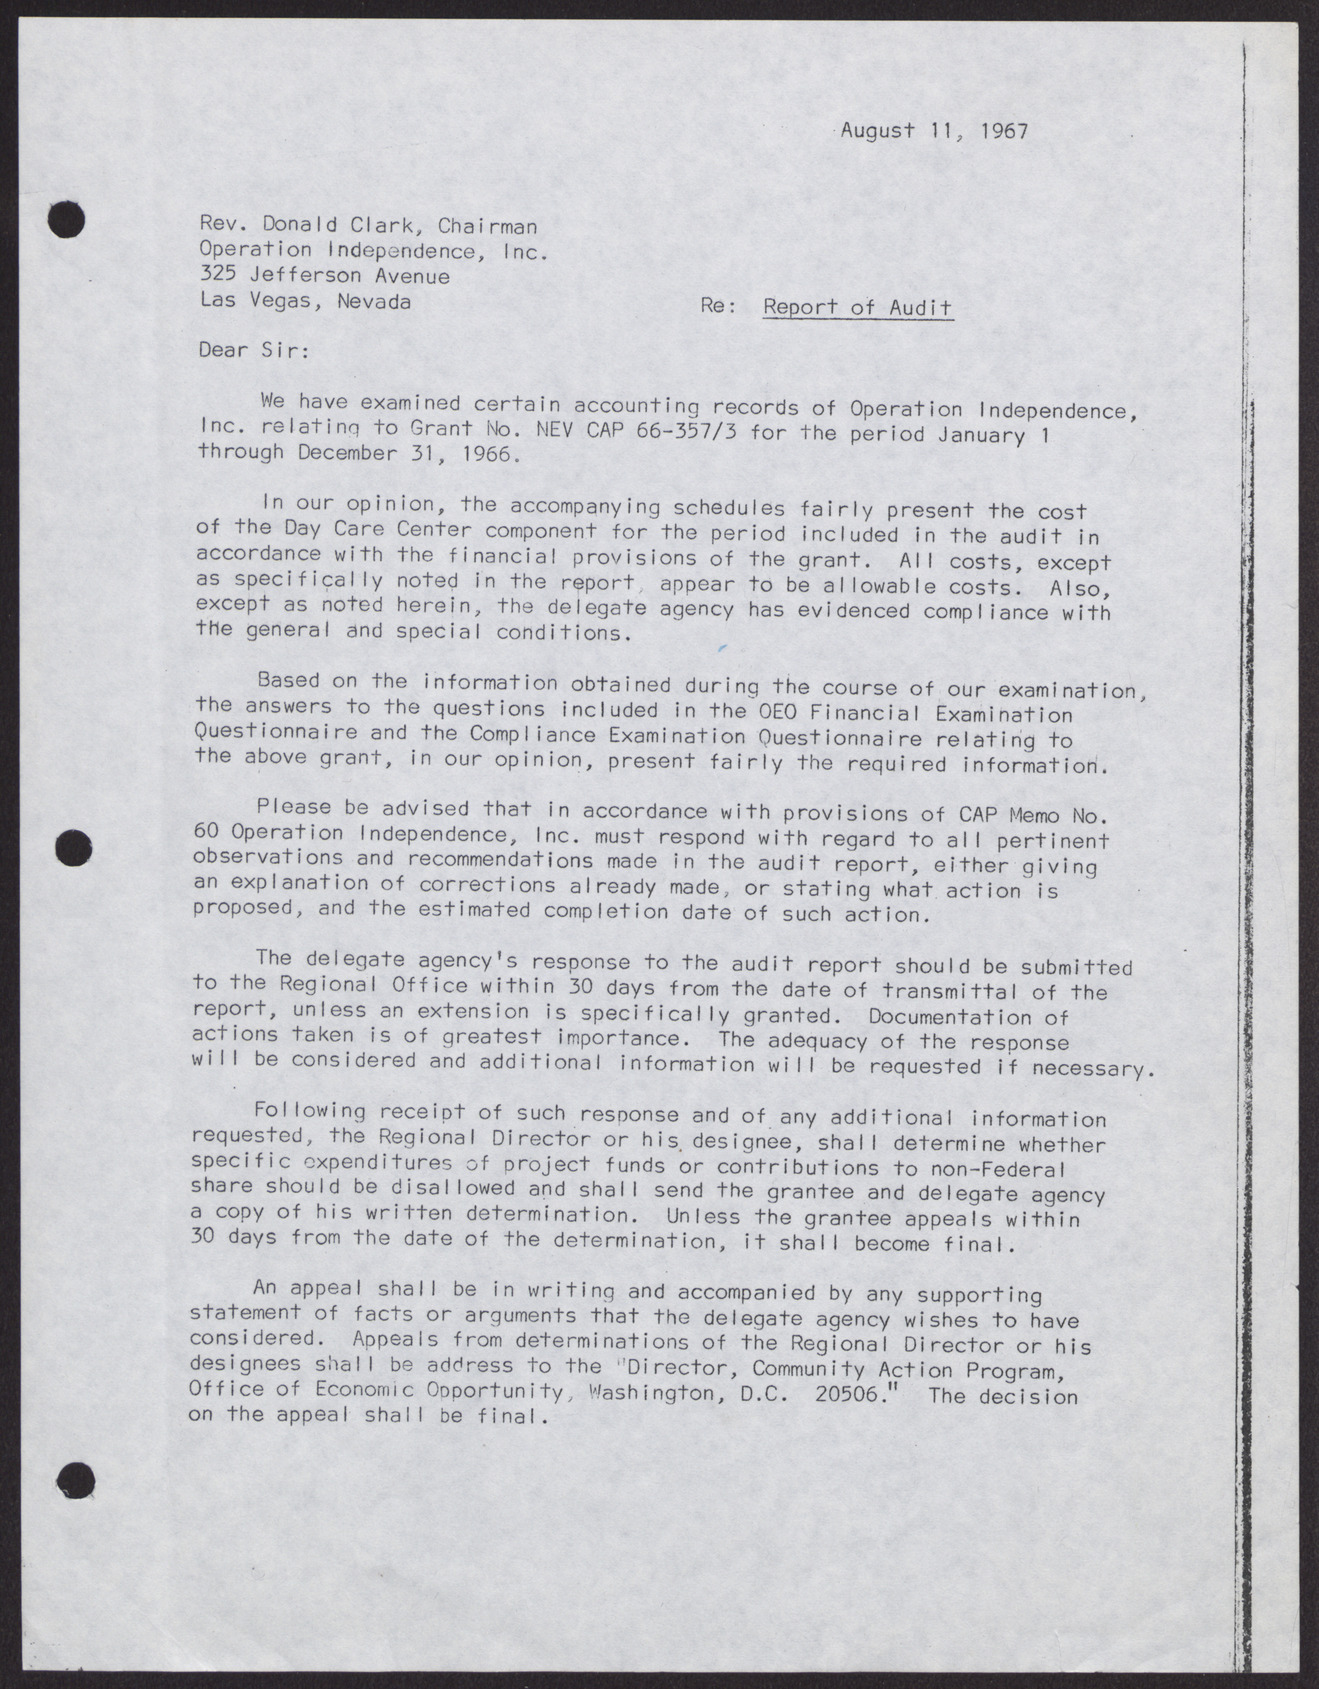 Letter Rev. Donald Clark from Evelyn H. Maudlin (2 pages), August 11, 1967